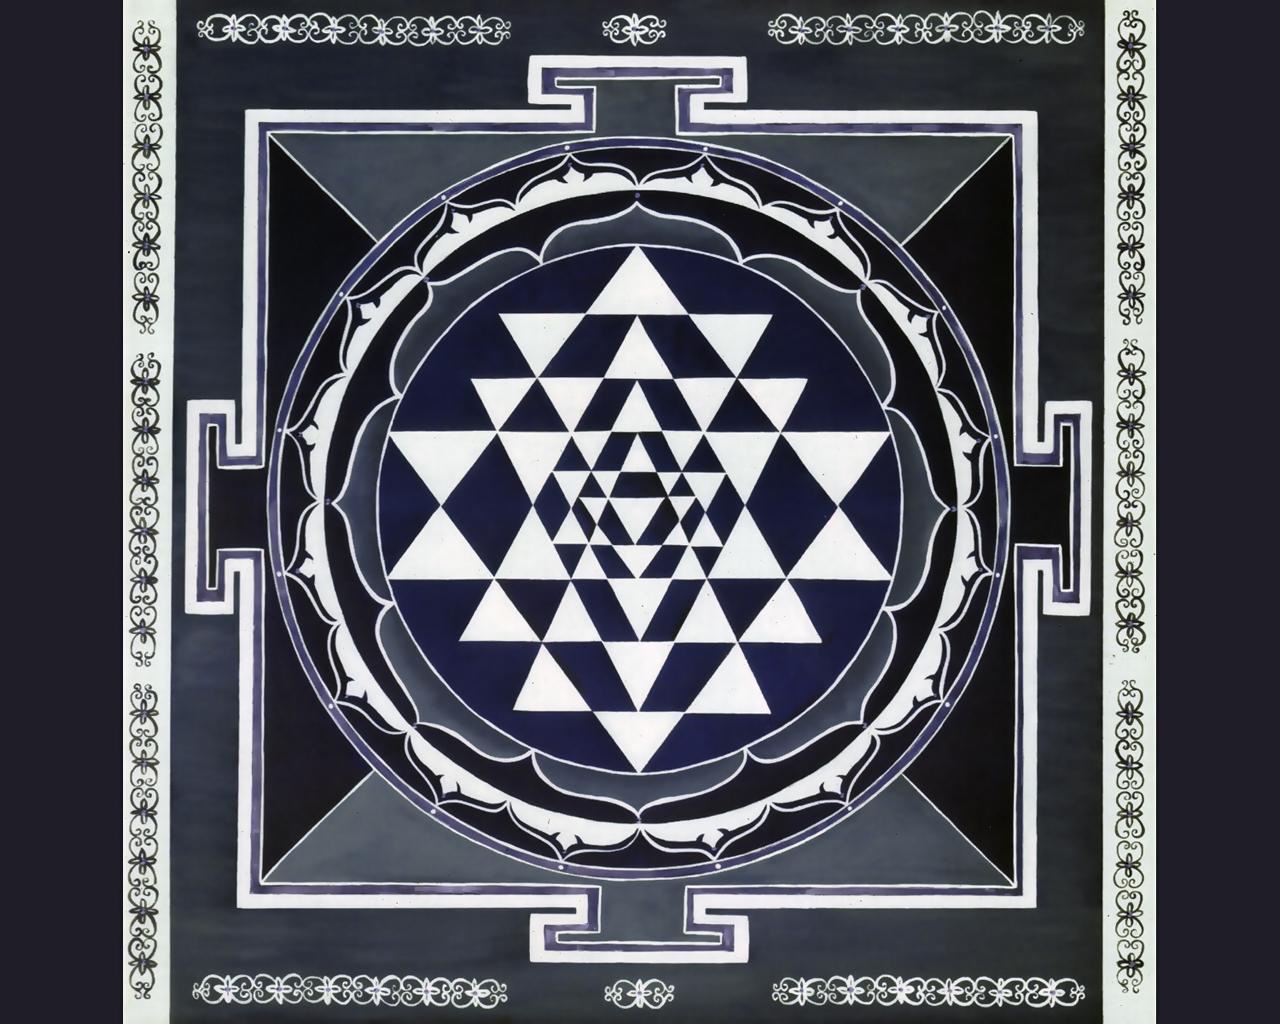 Sri Yantra Wallpaper. The Revolution is Within